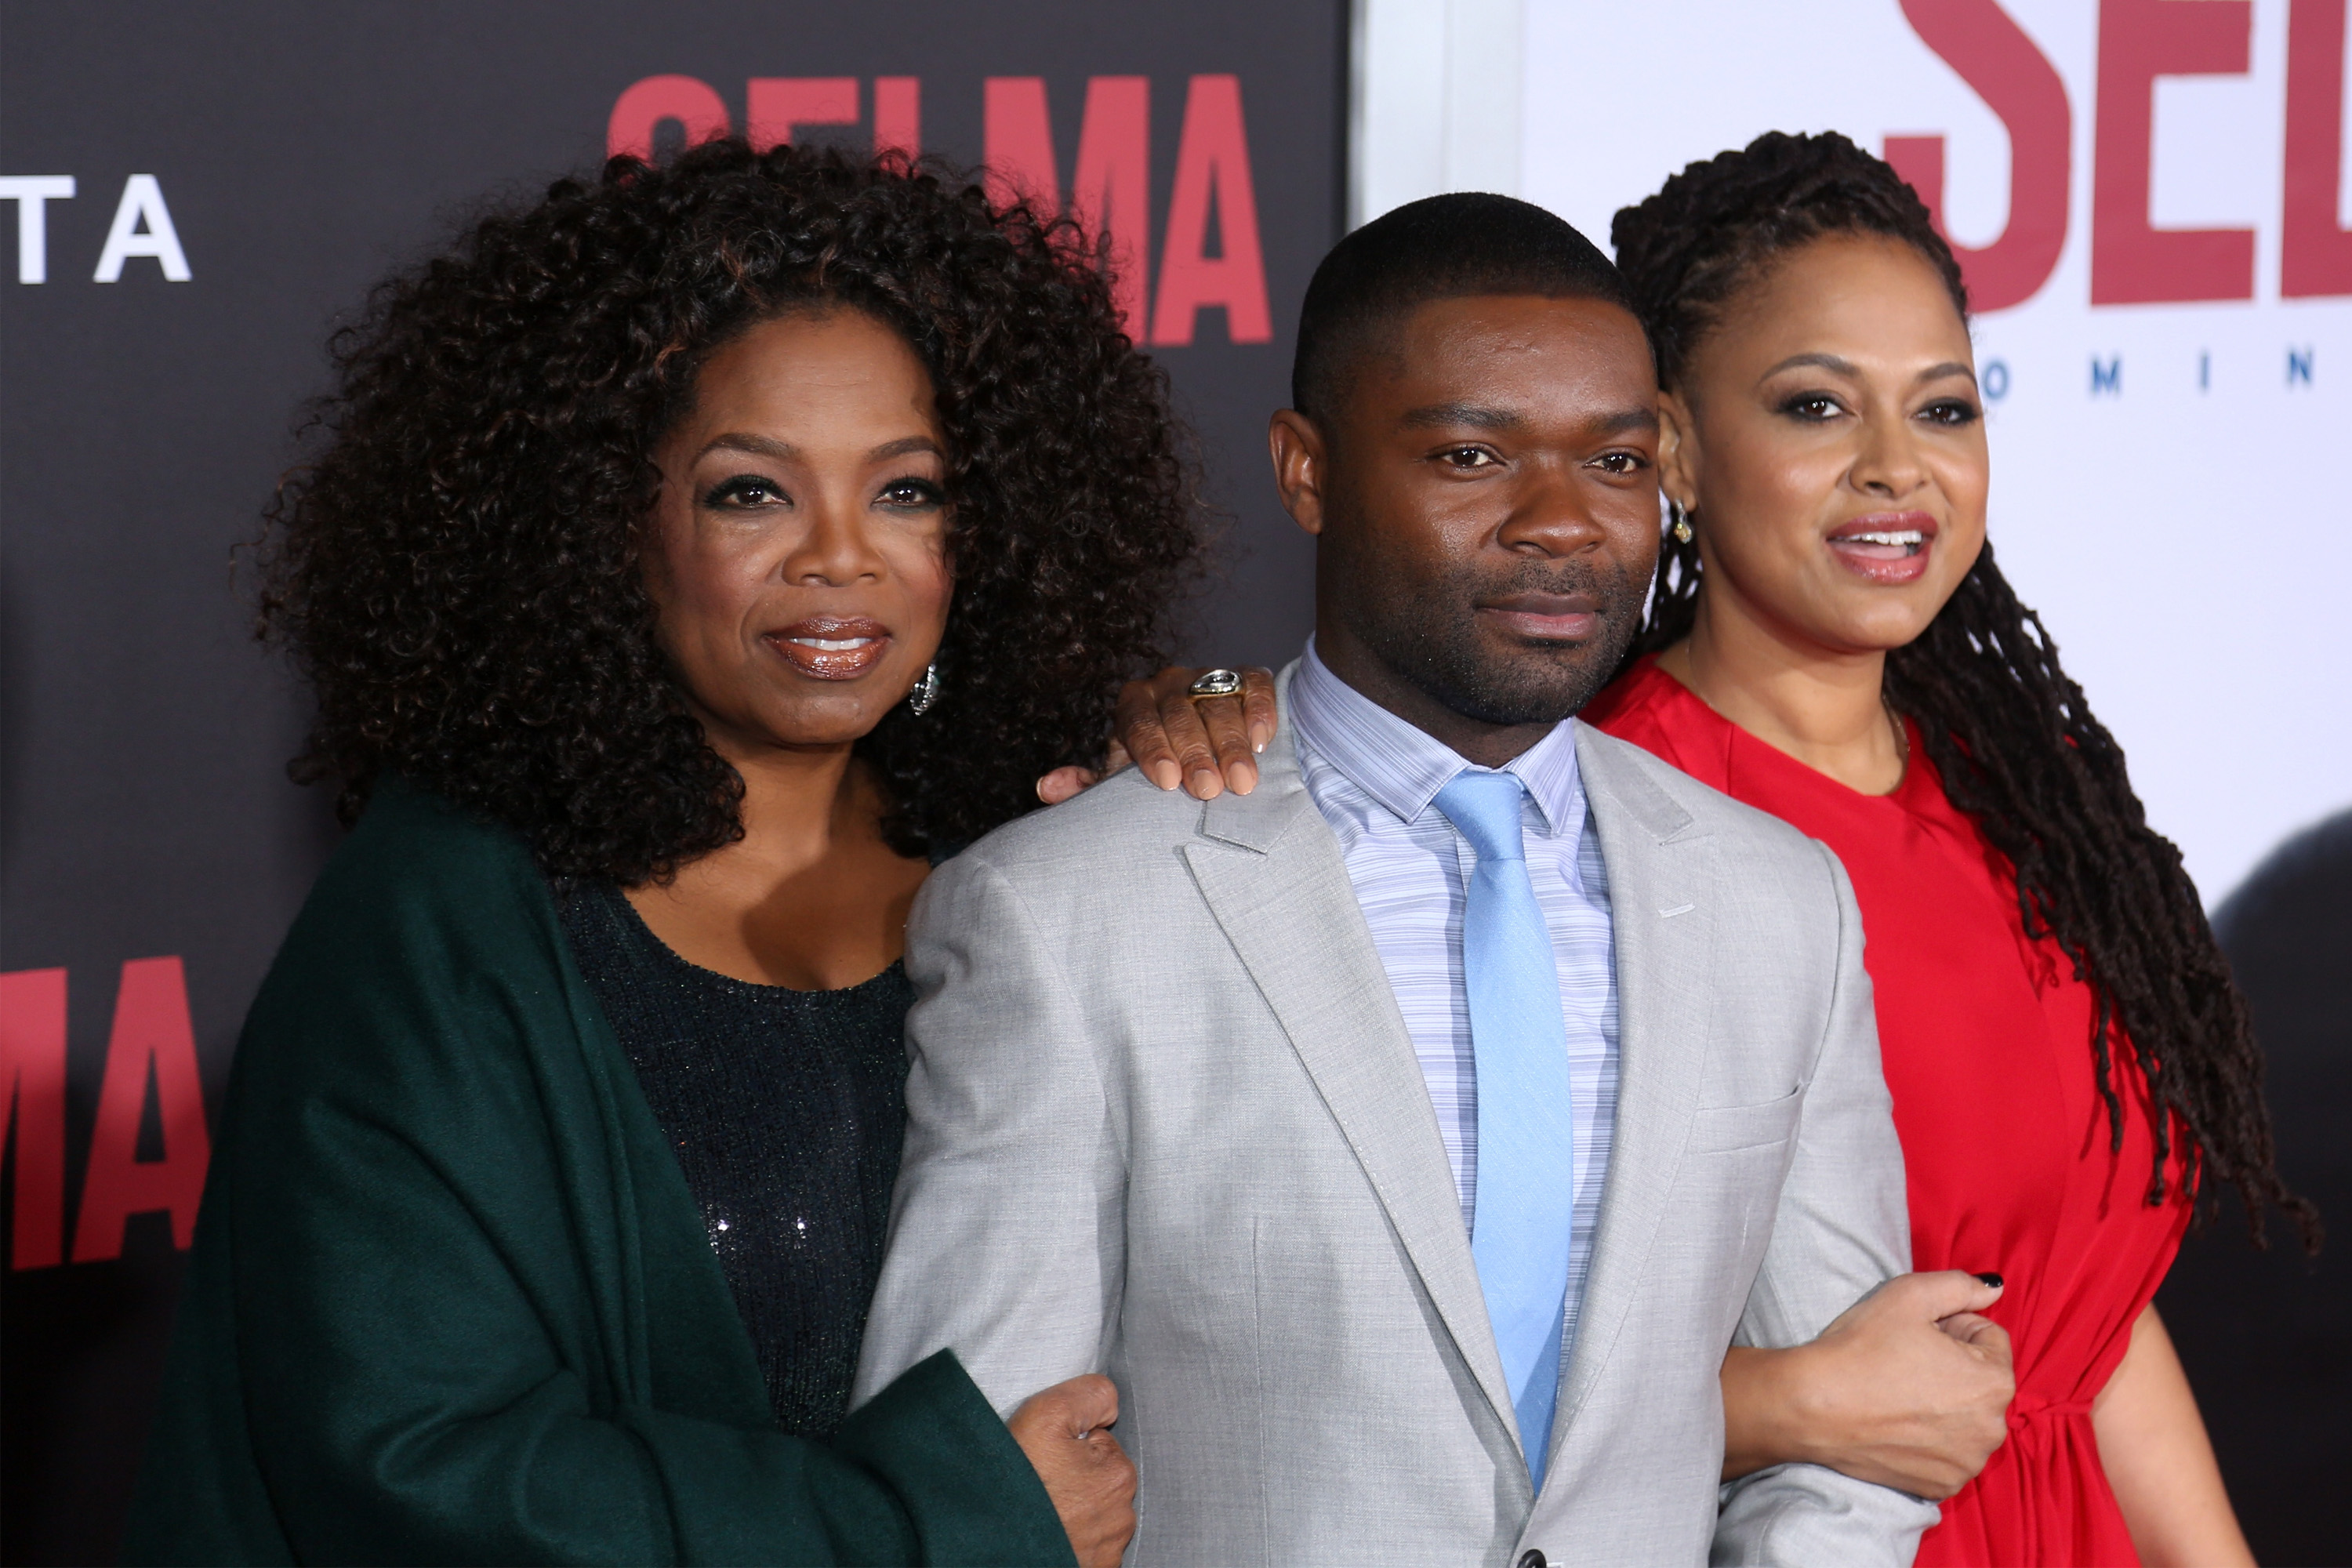 From left: Oprah, David Oyelowo, and Ava DuVernay, attend the 